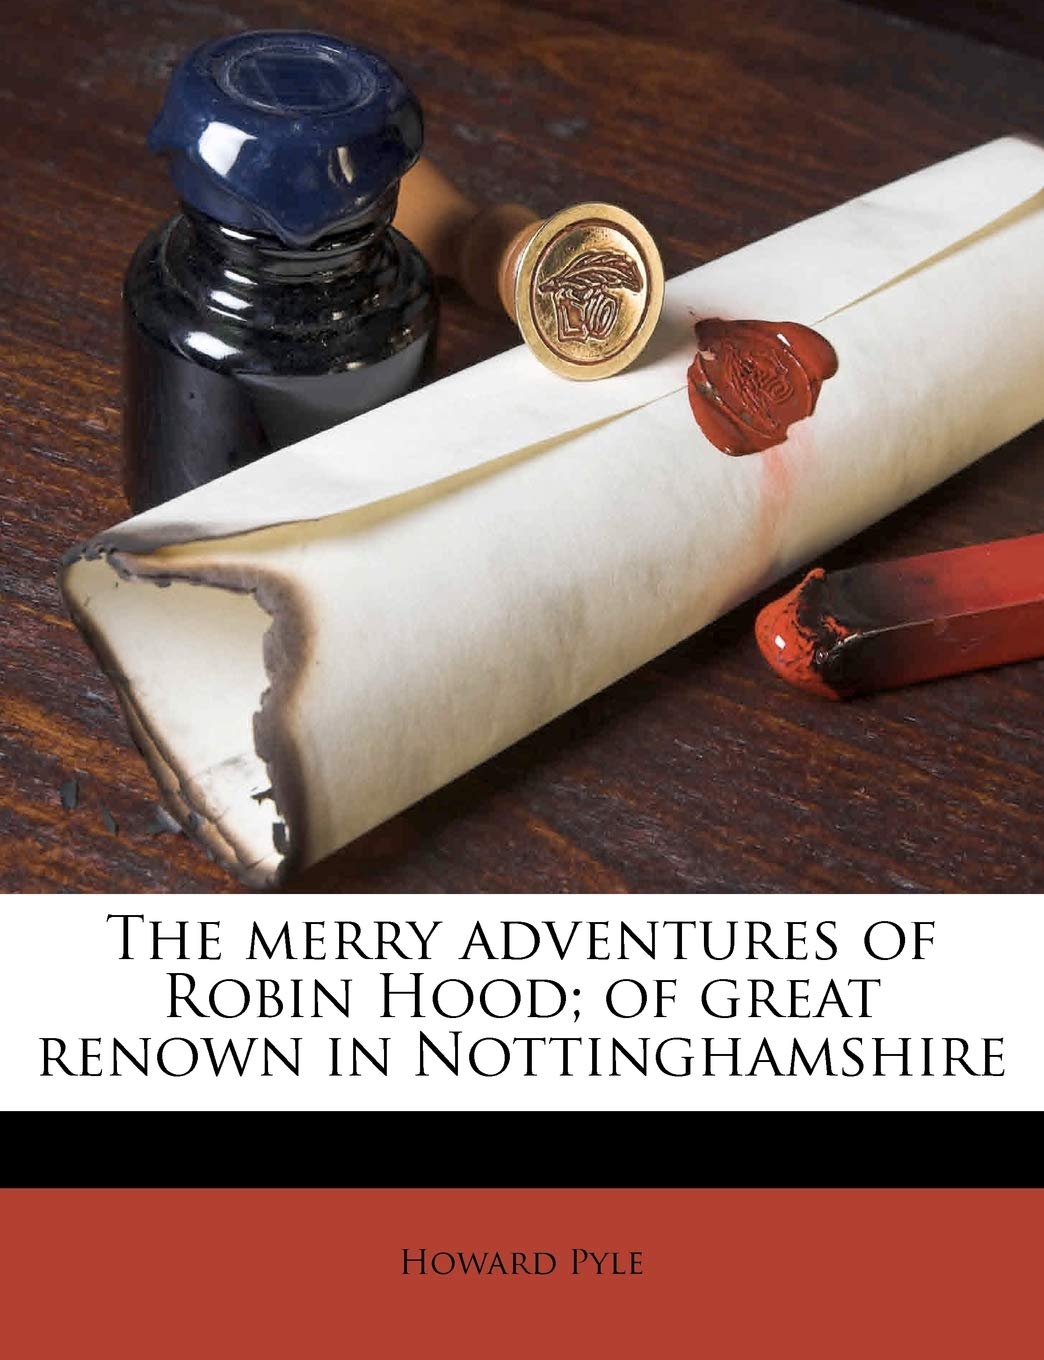 The Merry Adventures of Robin Hood of Great Renown In Nottinghamshire